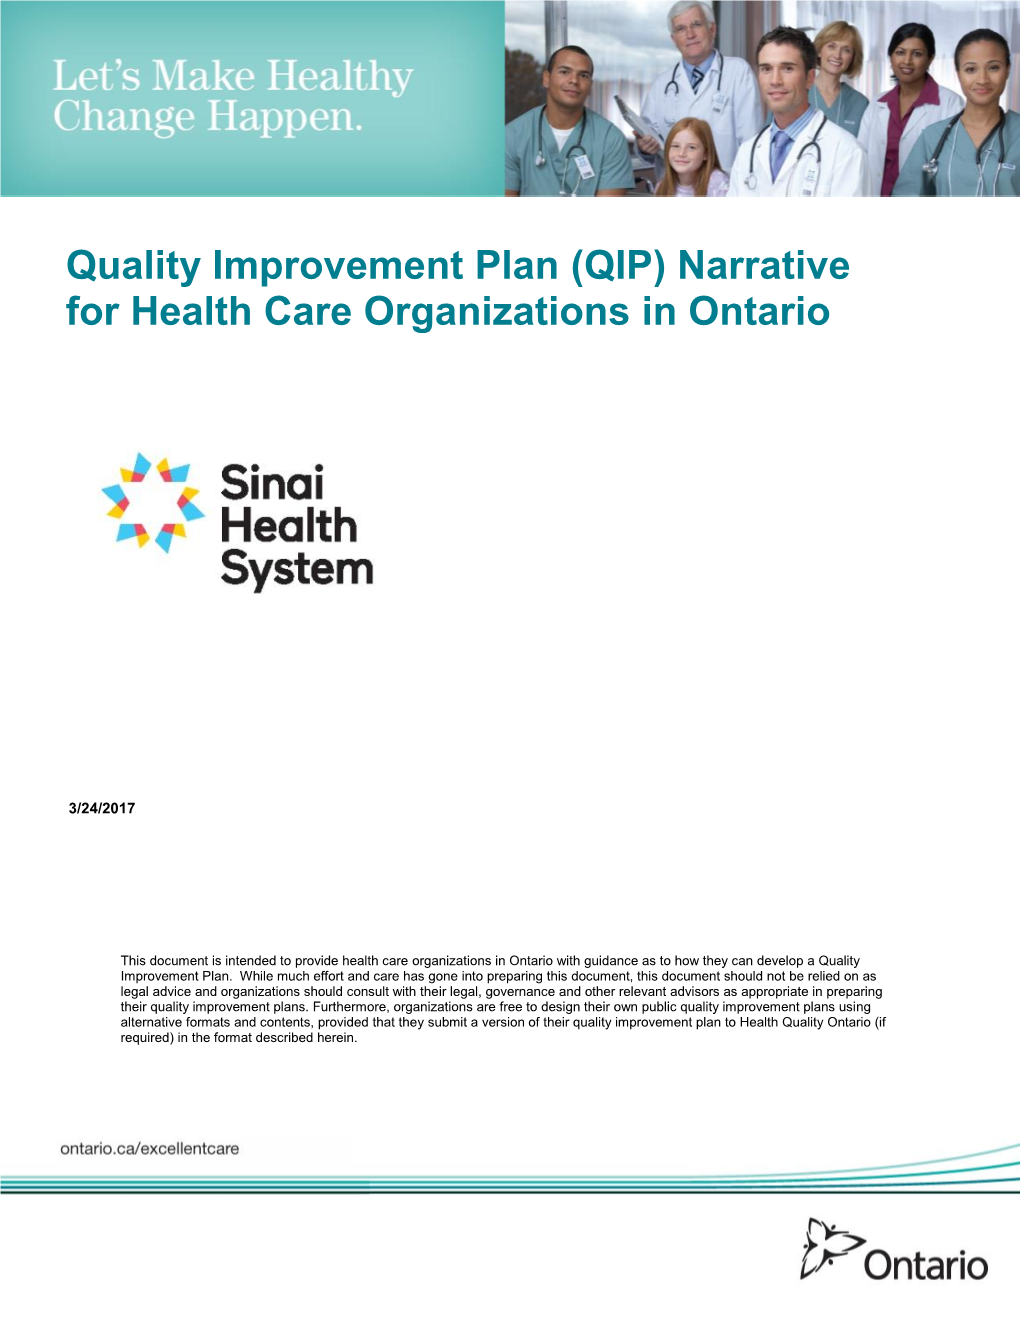 (QIP) Narrative for Health Care Organizations in Ontario